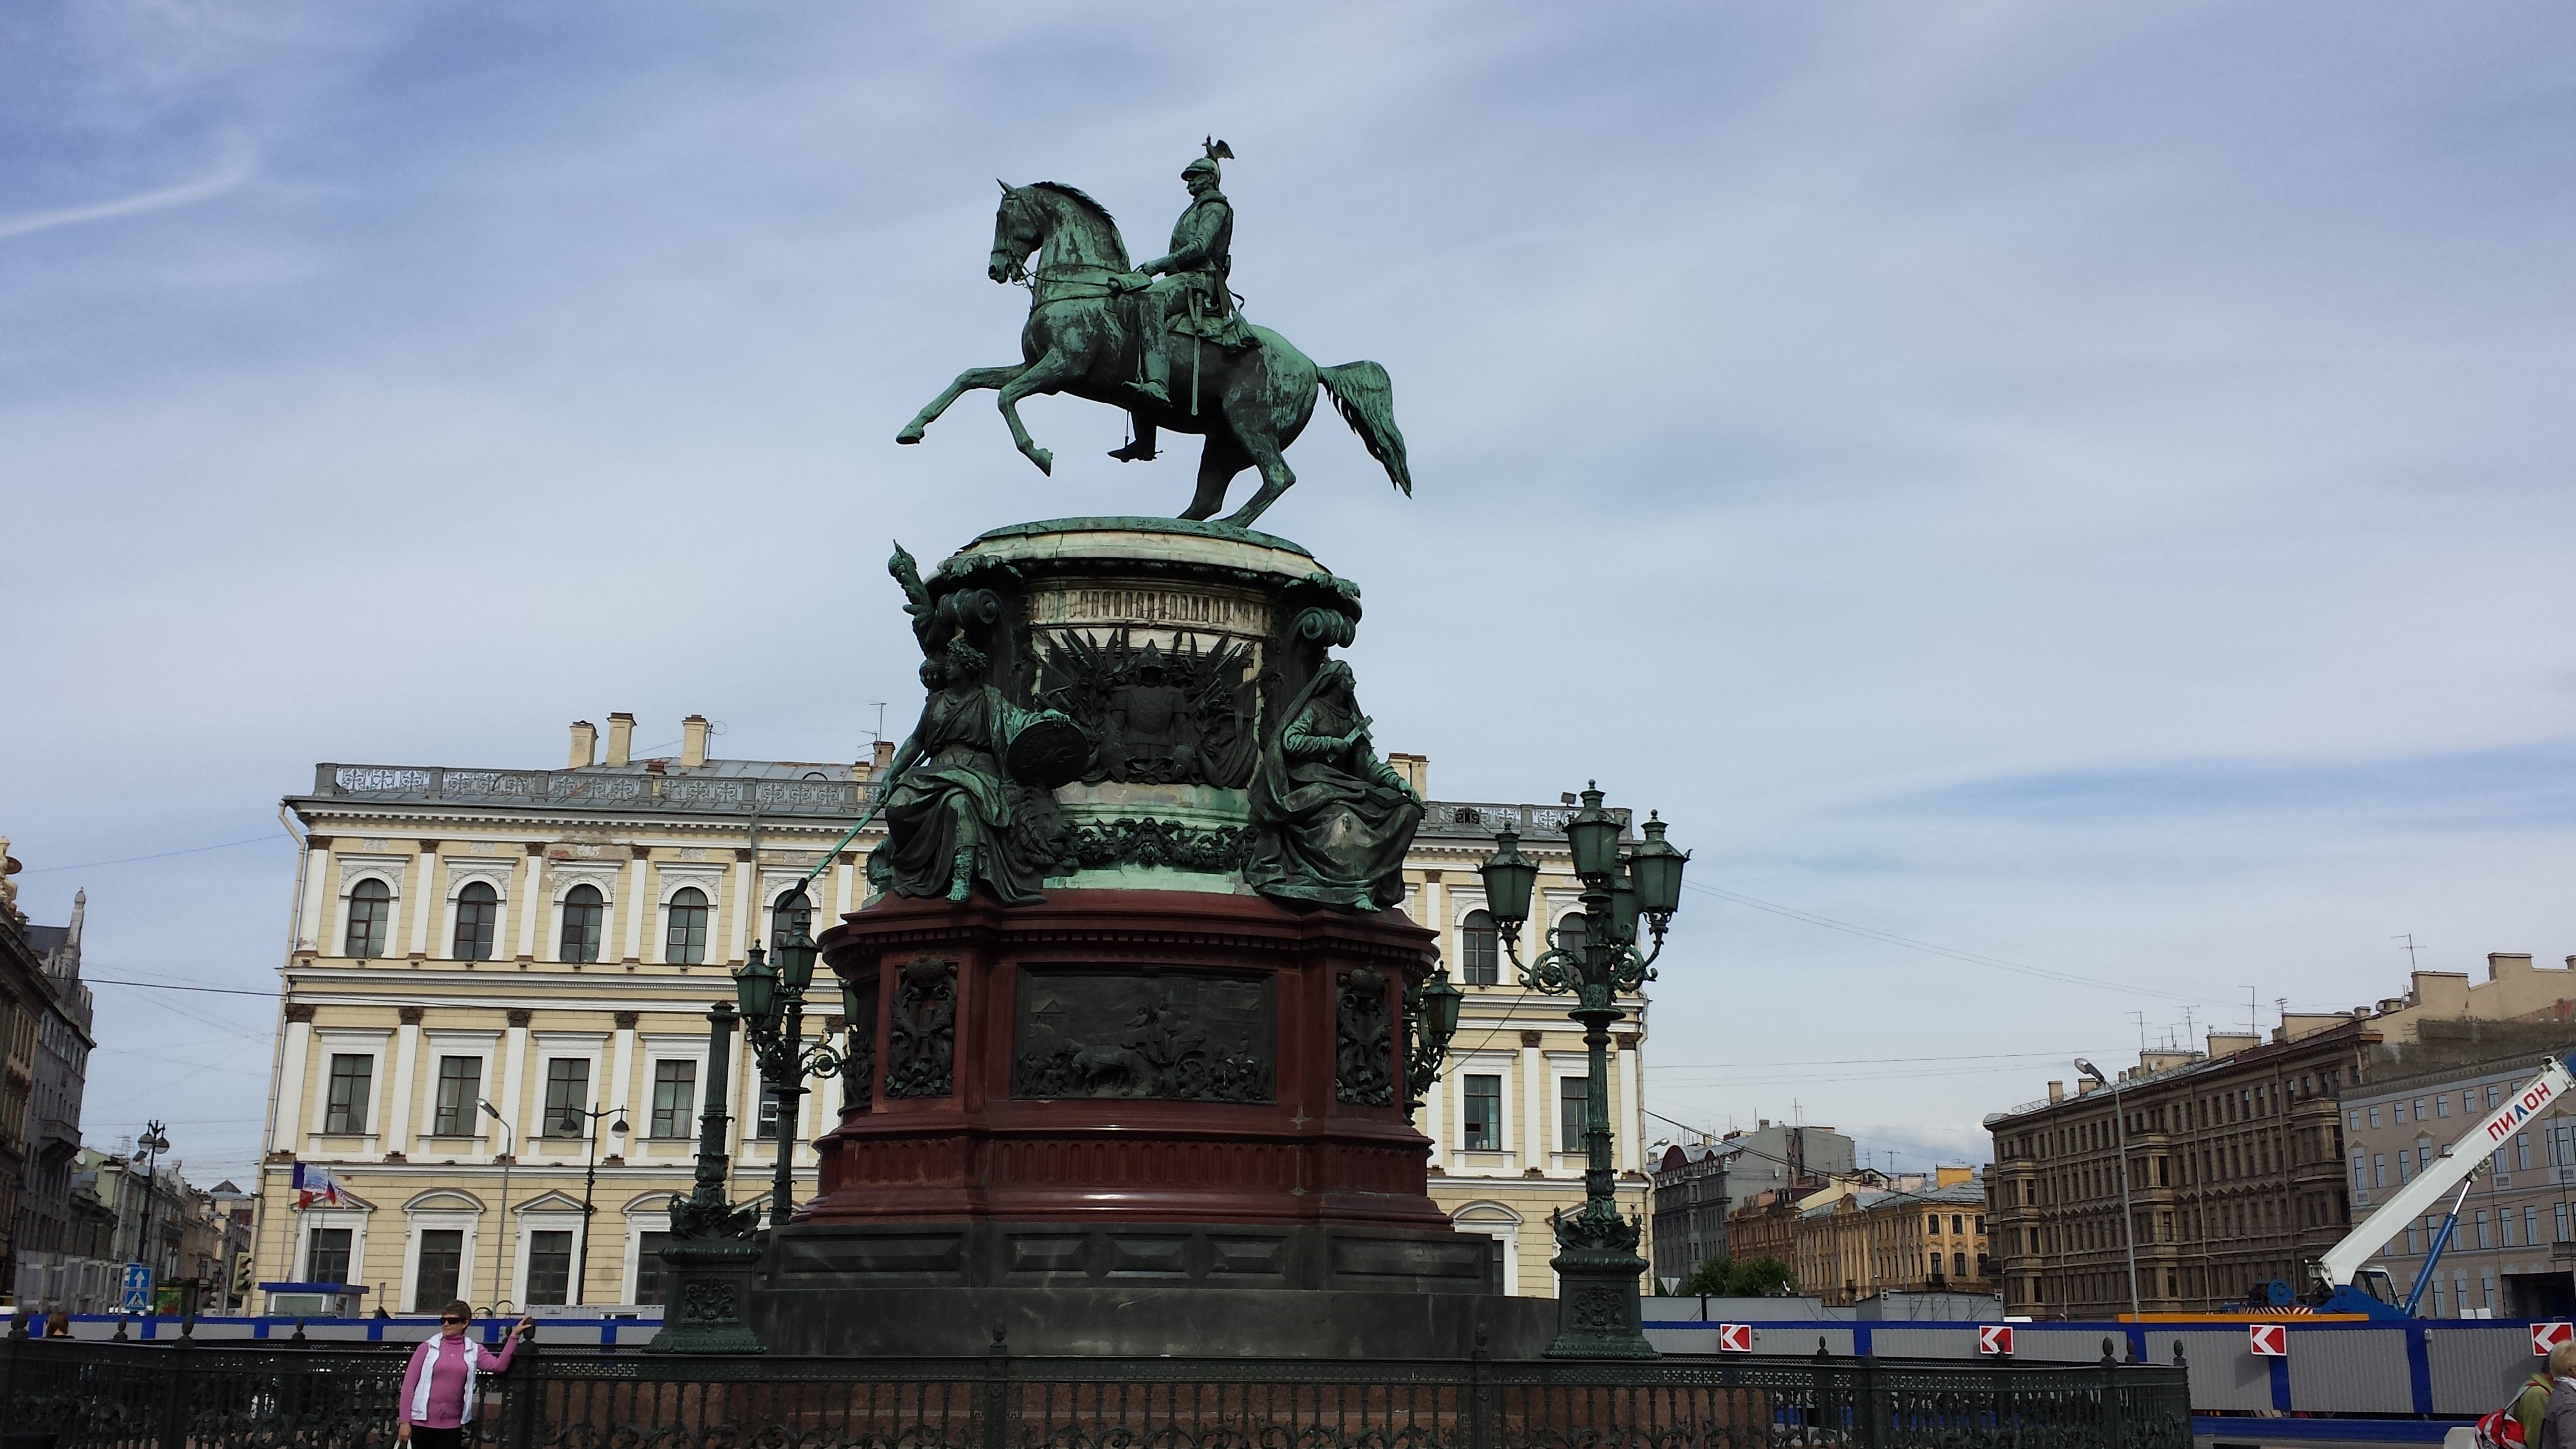 Horse Statues of St. Petersburg - The Footloose Freckle